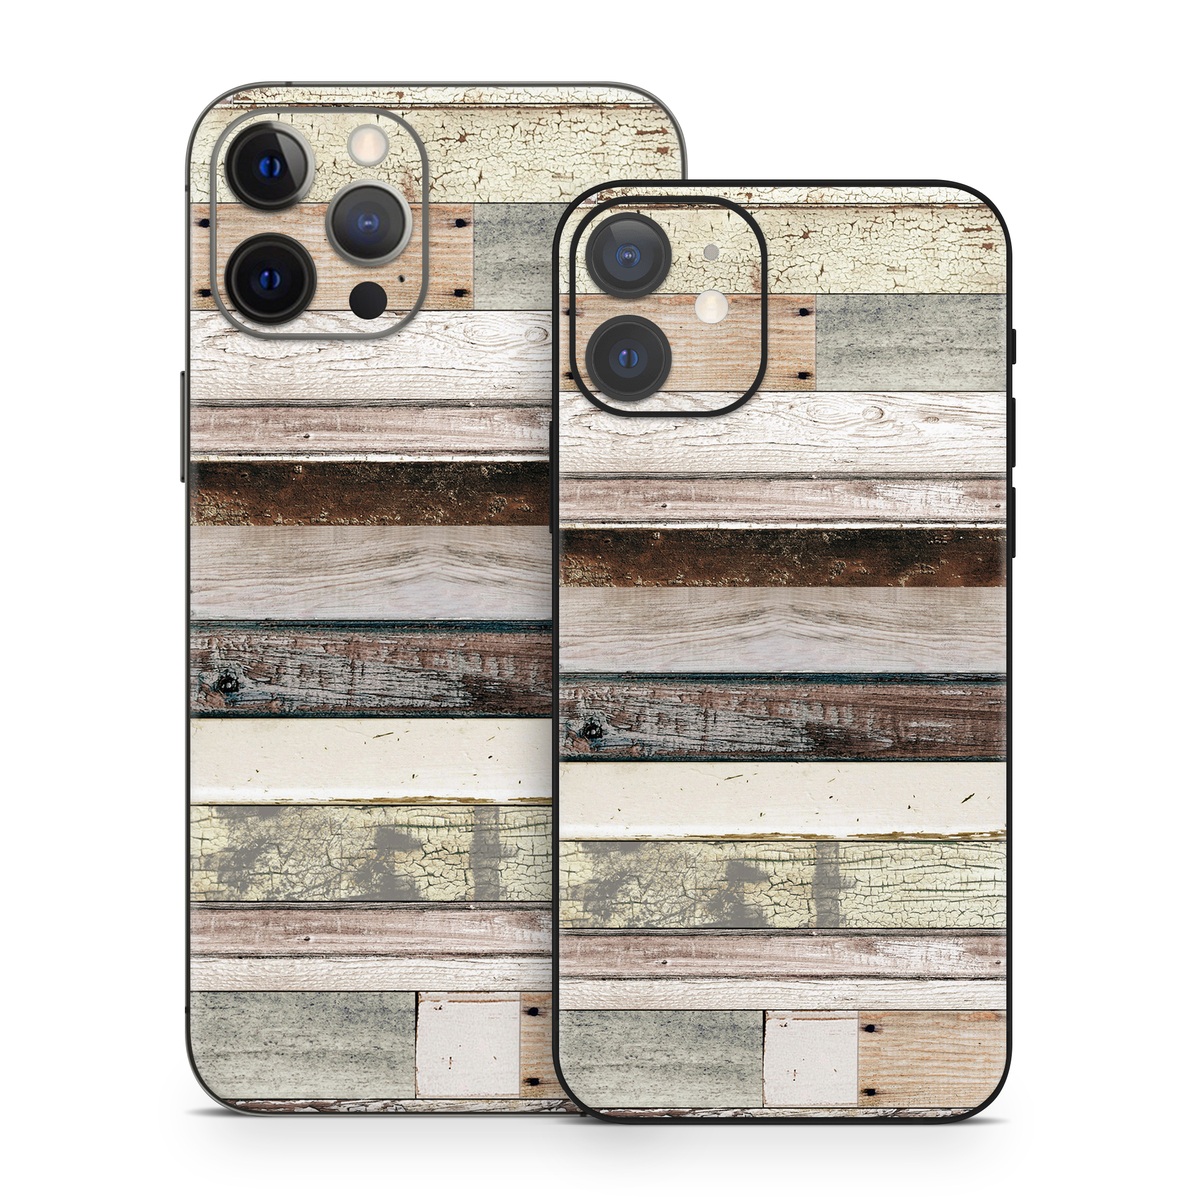 iPhone 12 Skin design of Wood, Wall, Plank, Line, Lumber, Wood stain, Beige, Parallel, Hardwood, Pattern with brown, white, gray, yellow colors